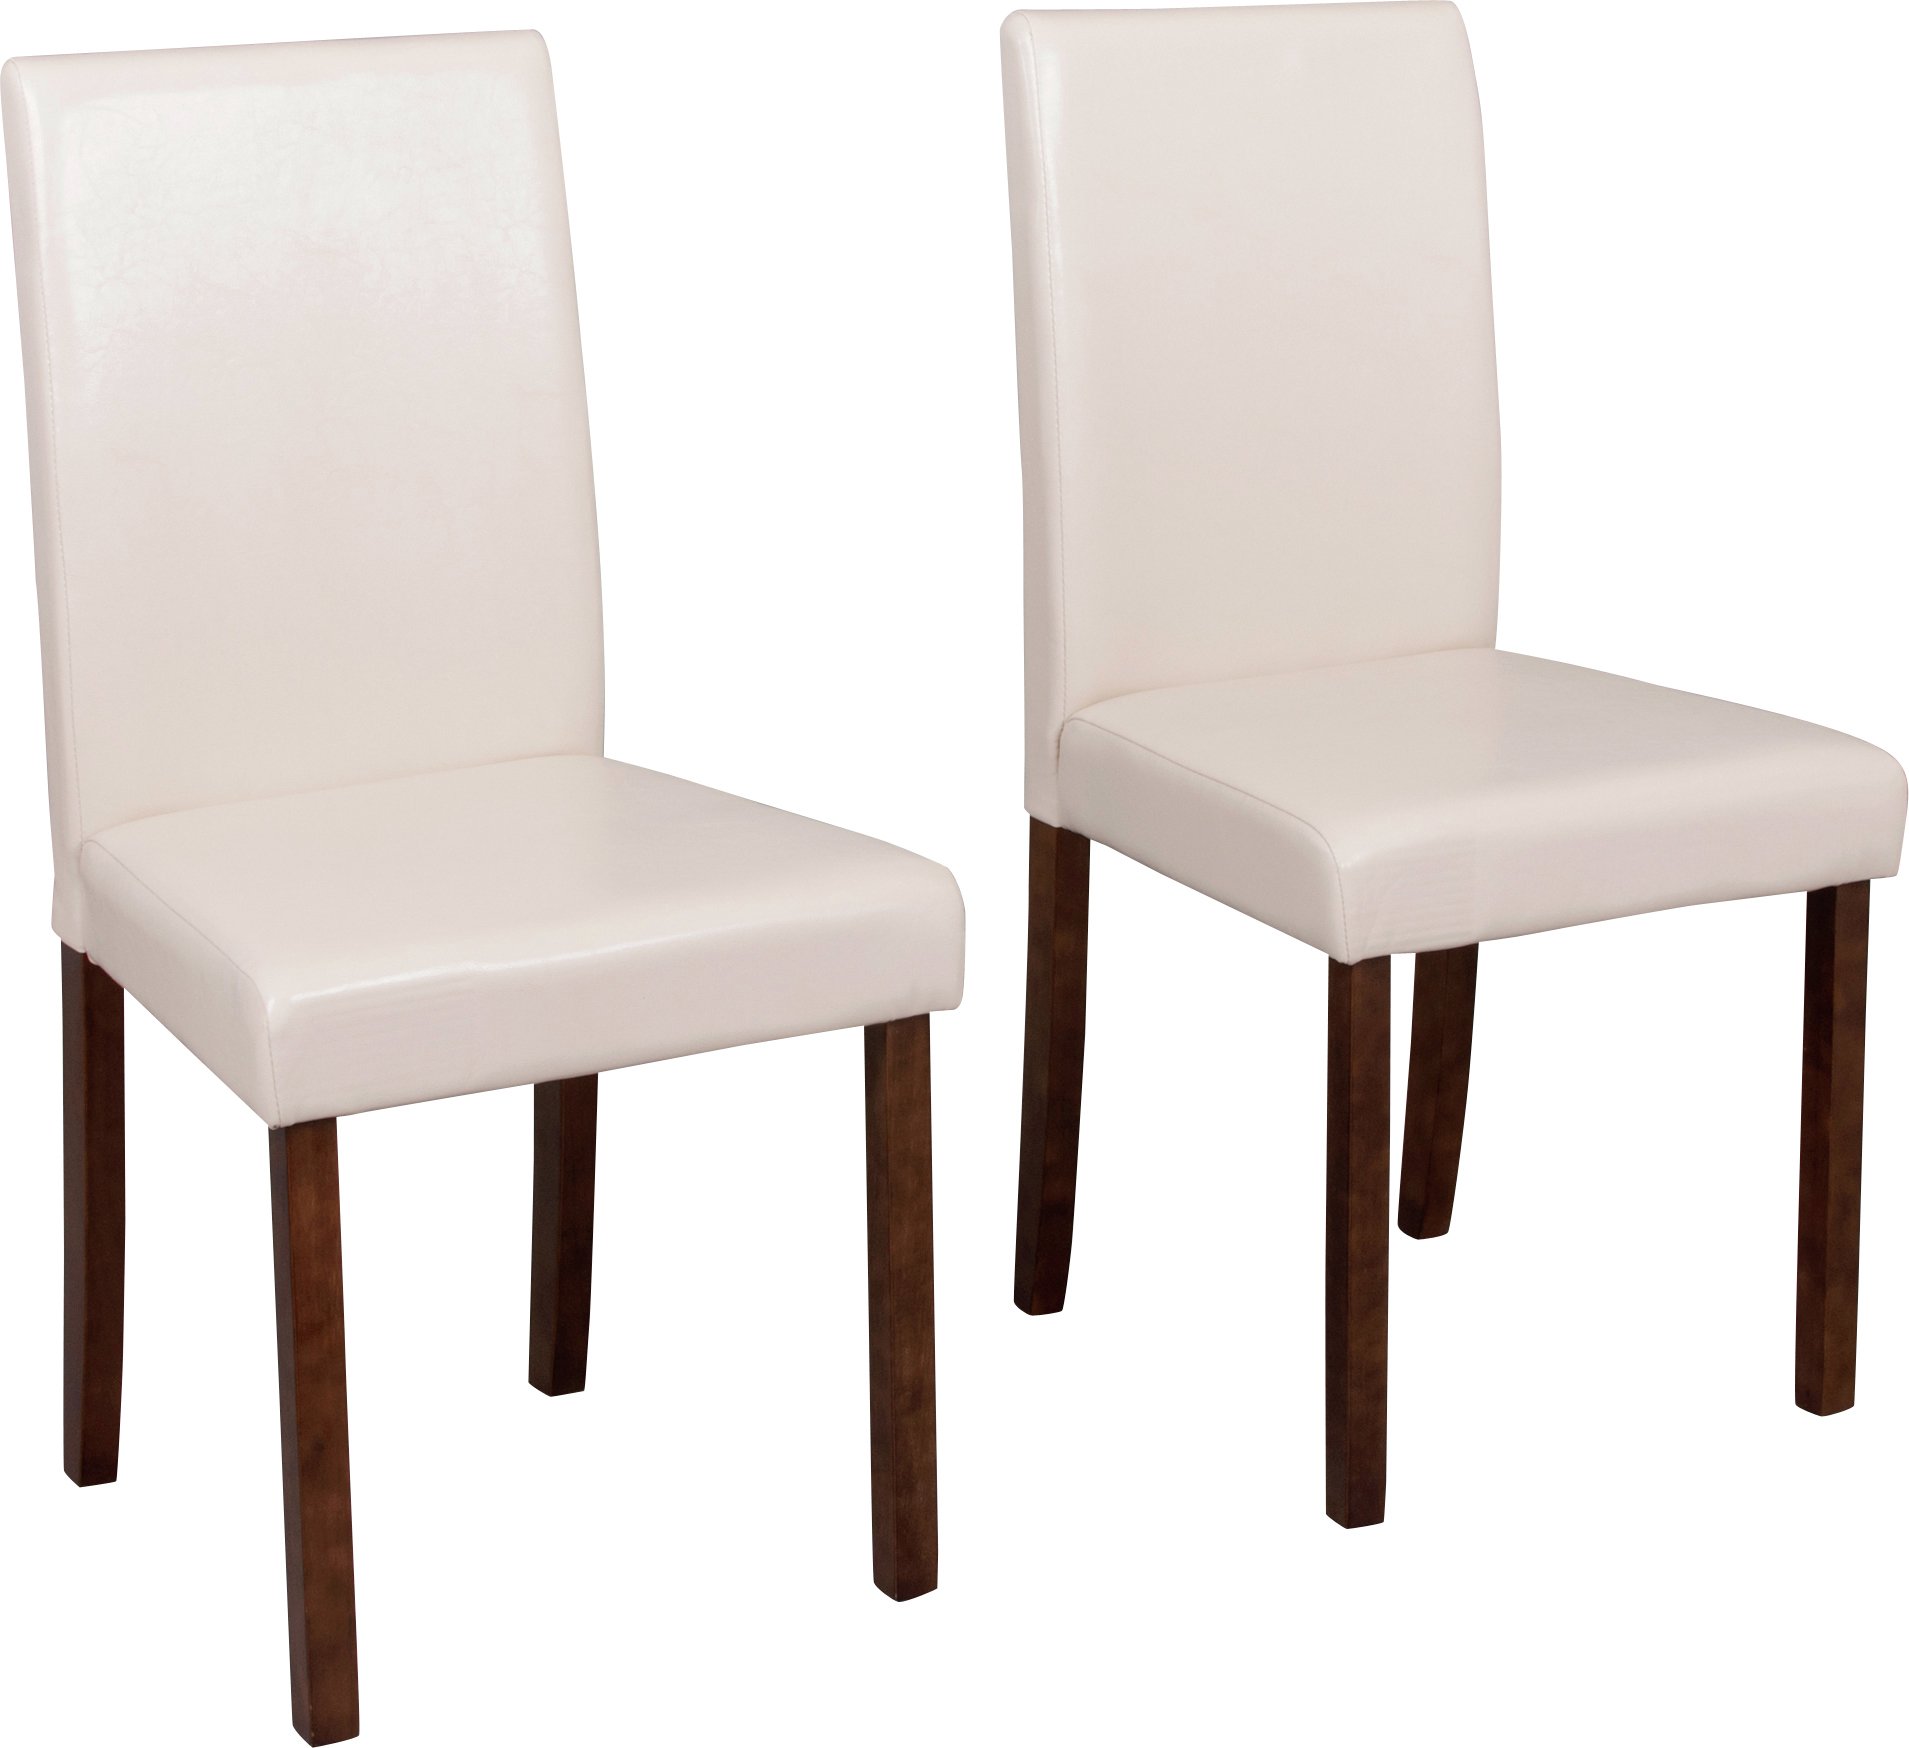 Argos Home Pair of Leather Effect Mid Back Chairs - Cream